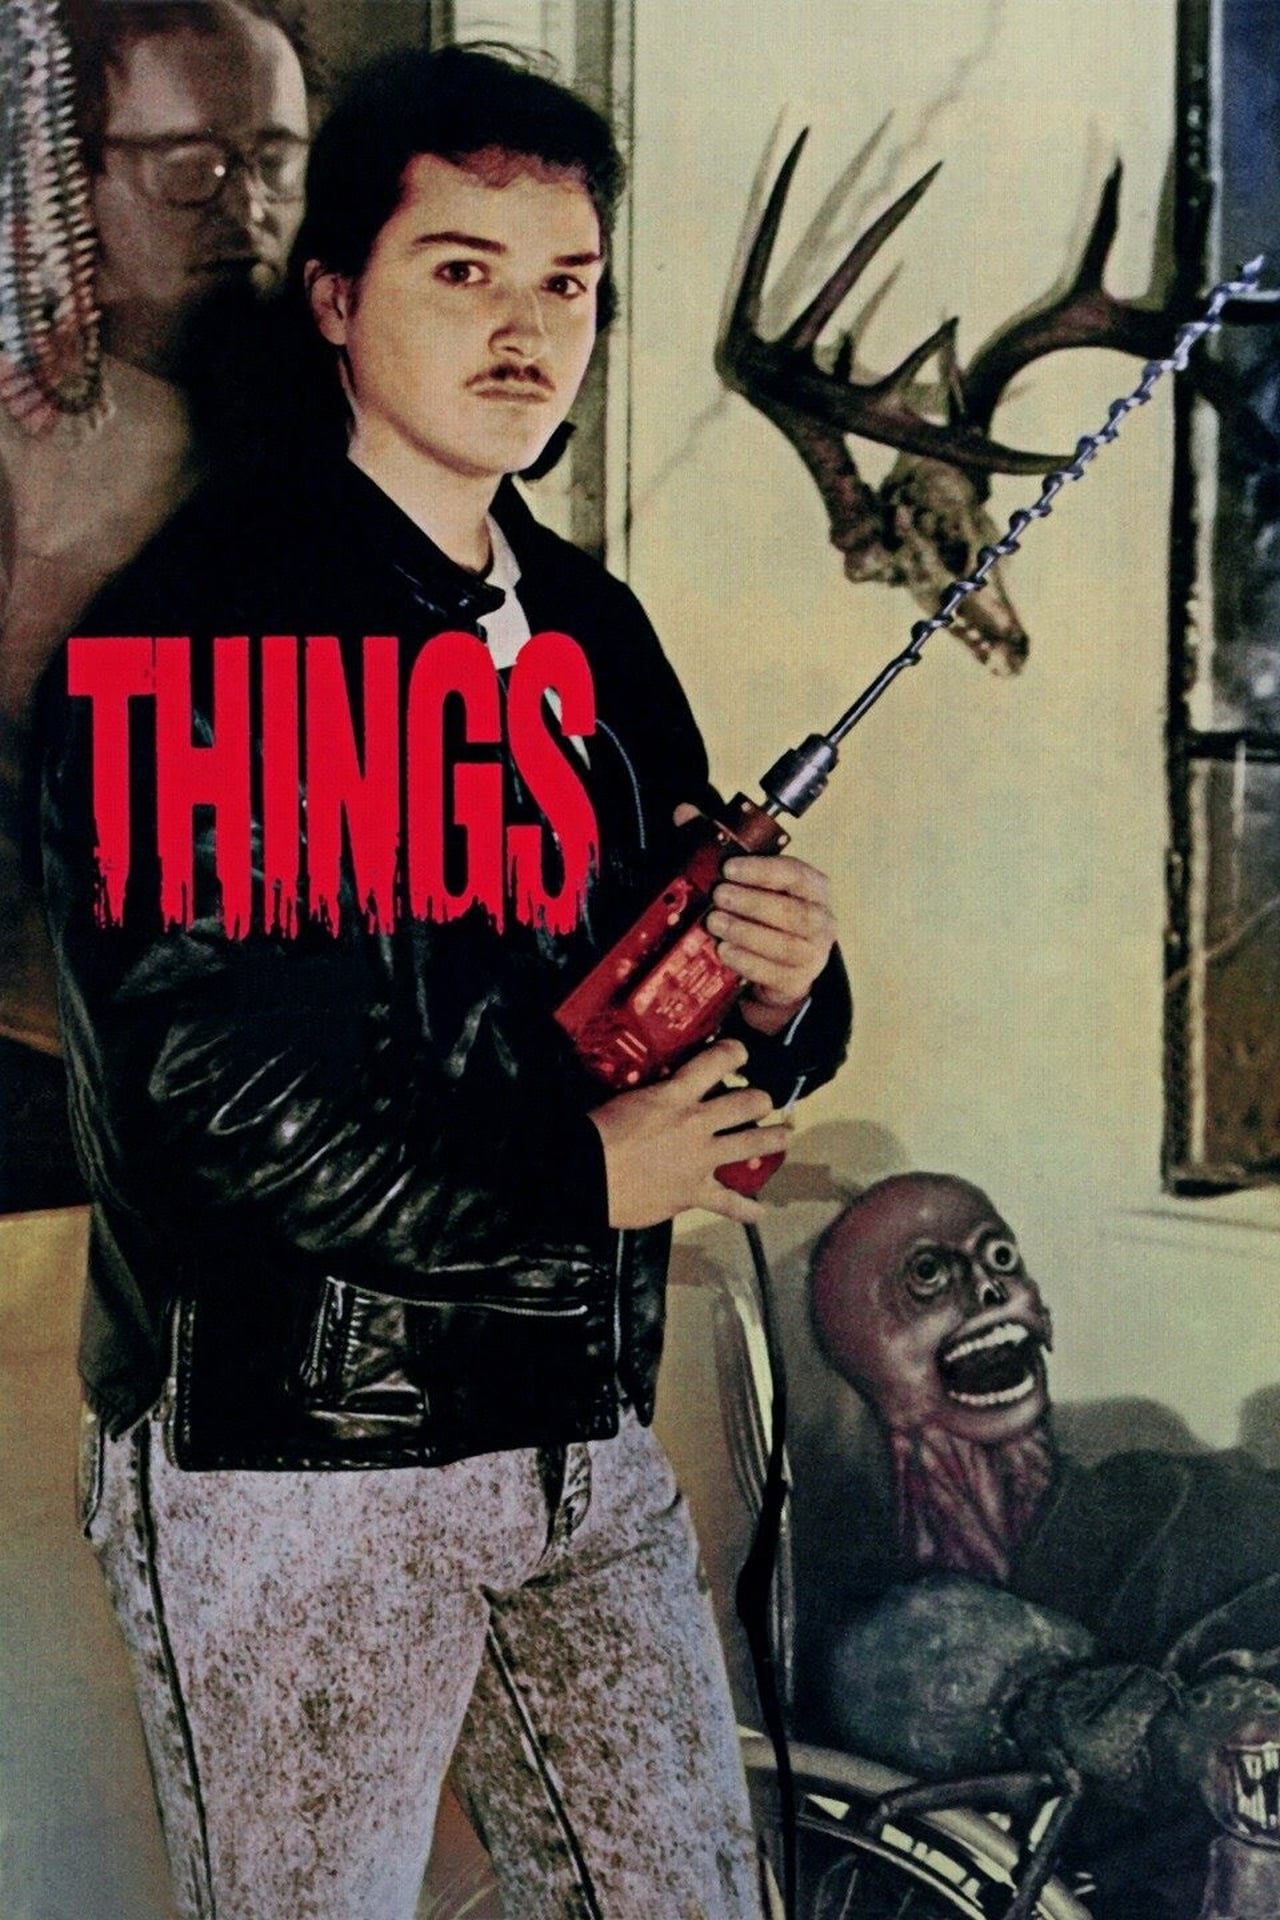 Things poster